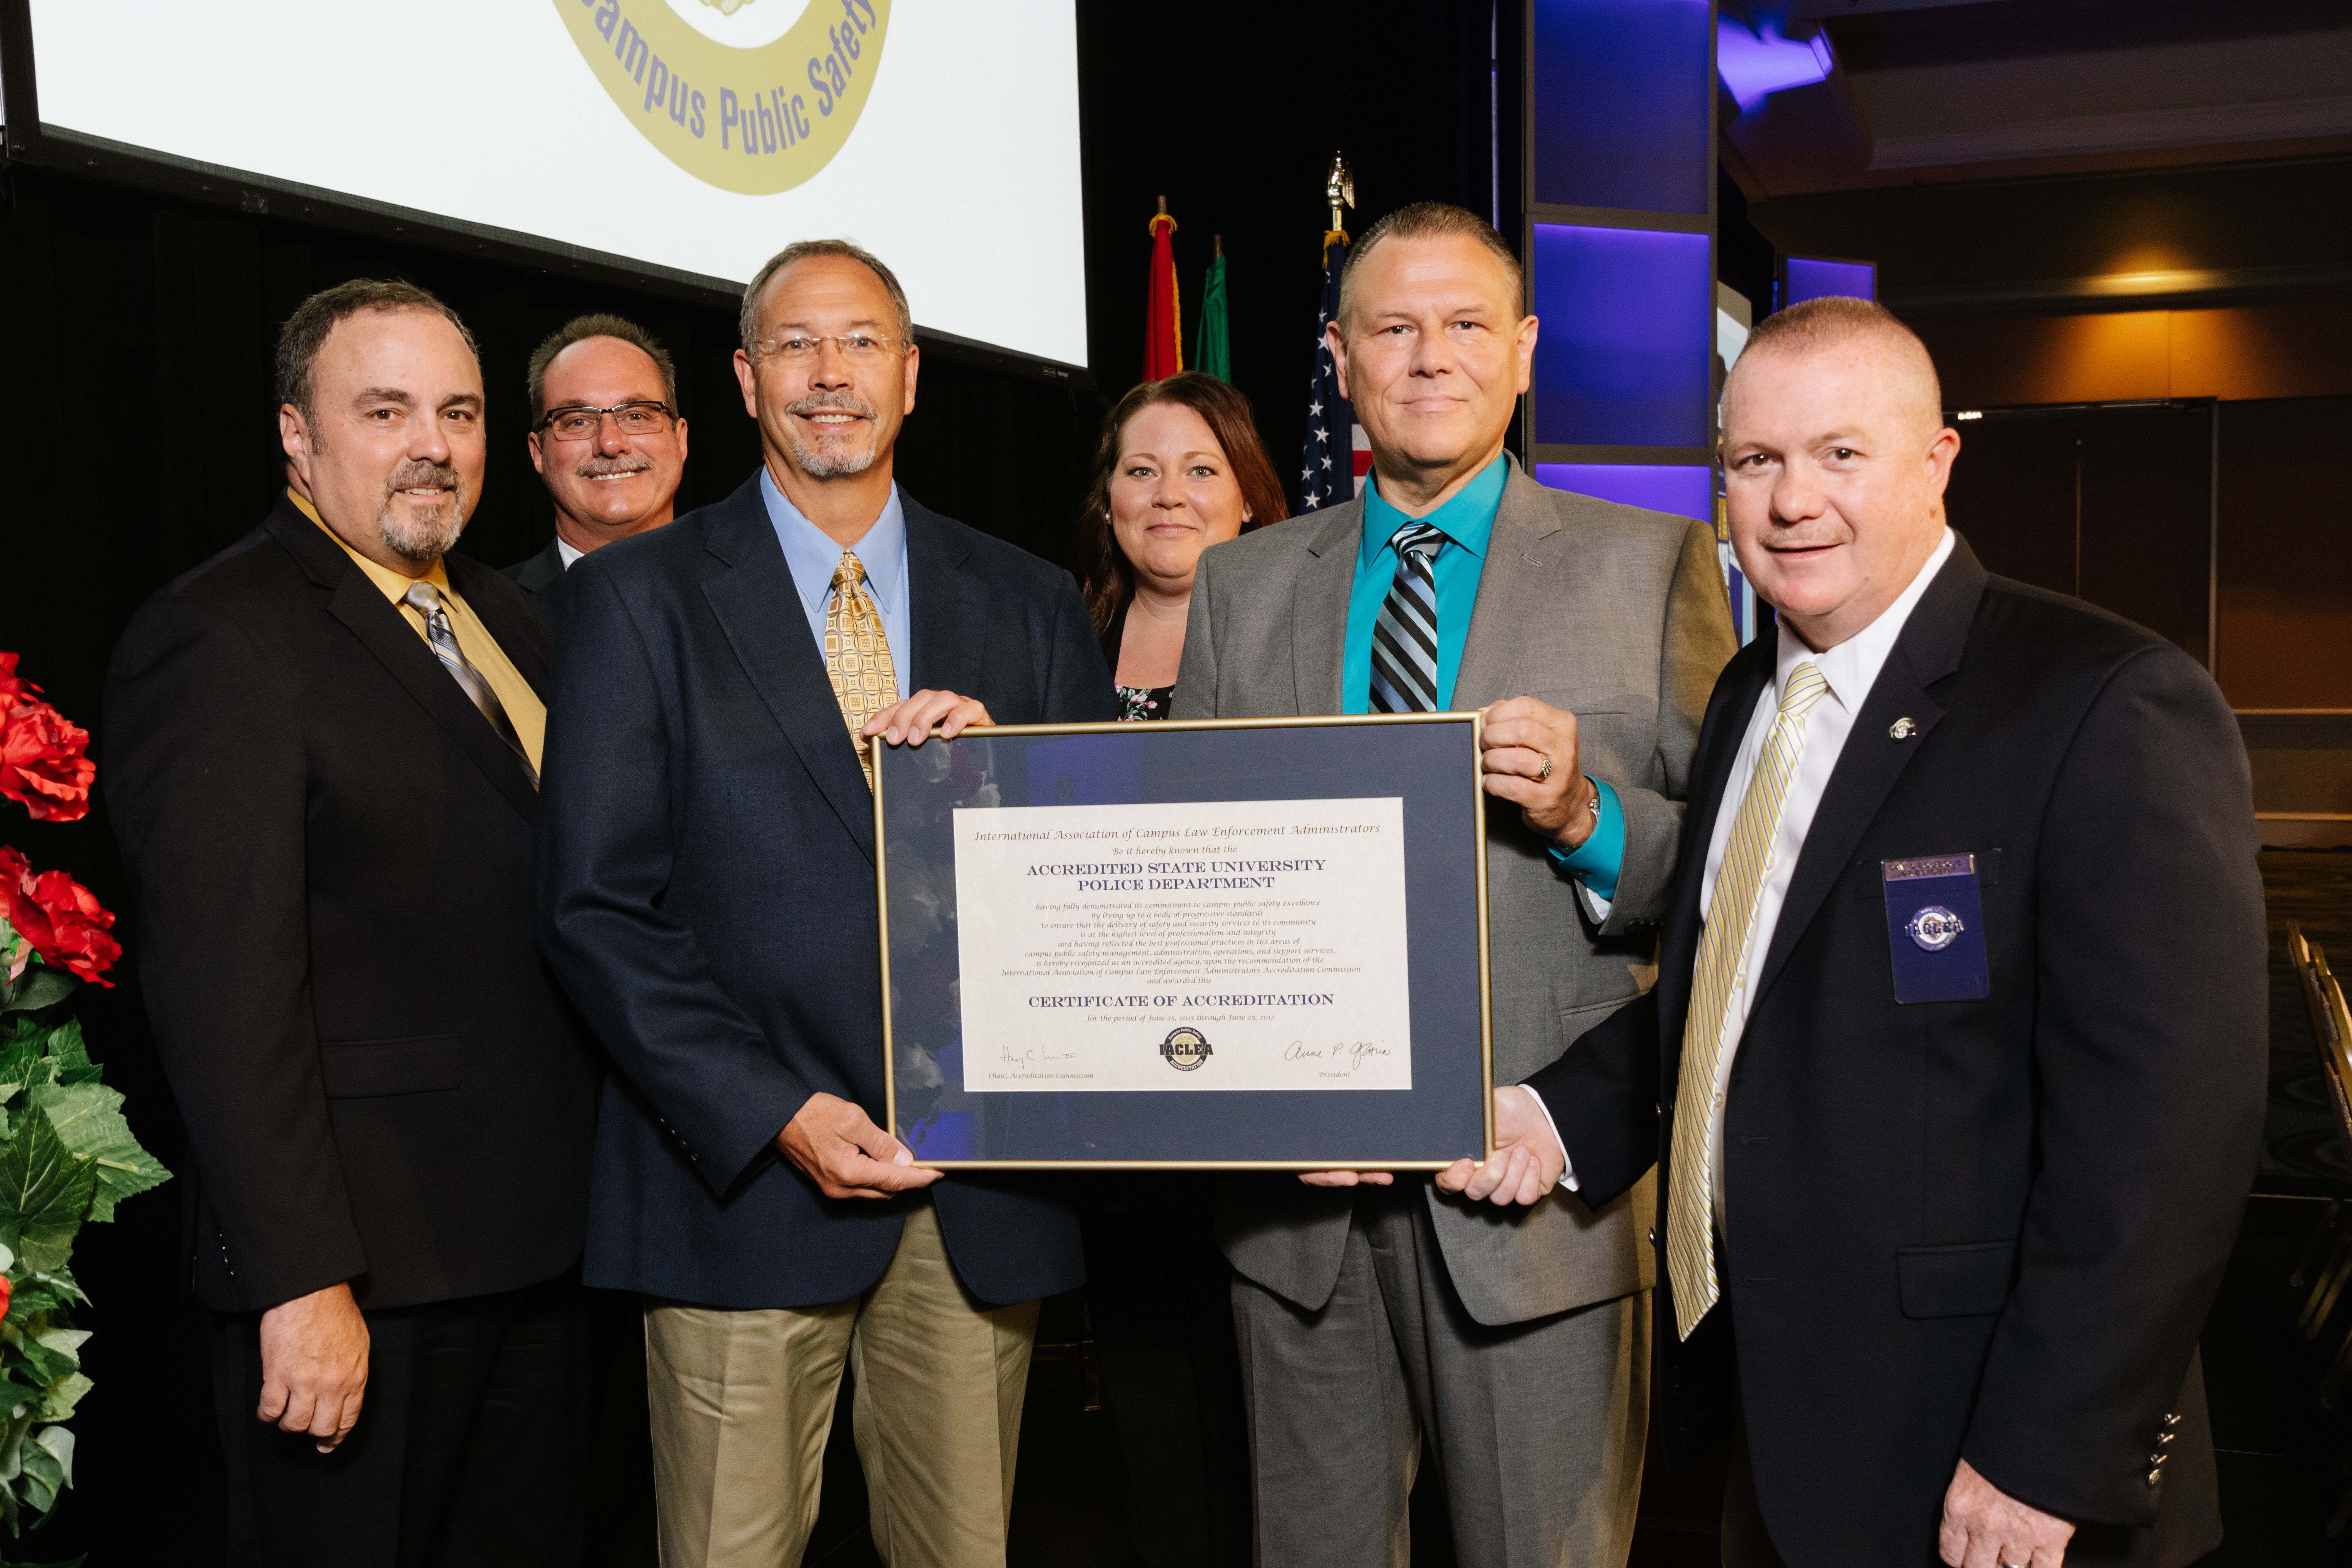 Representatives of the College of Lake County (Illinois) Police Department accepted their IACLEA Accreditation Award at the 2018 Annual Conference & Exposition. © Mike Ritter 